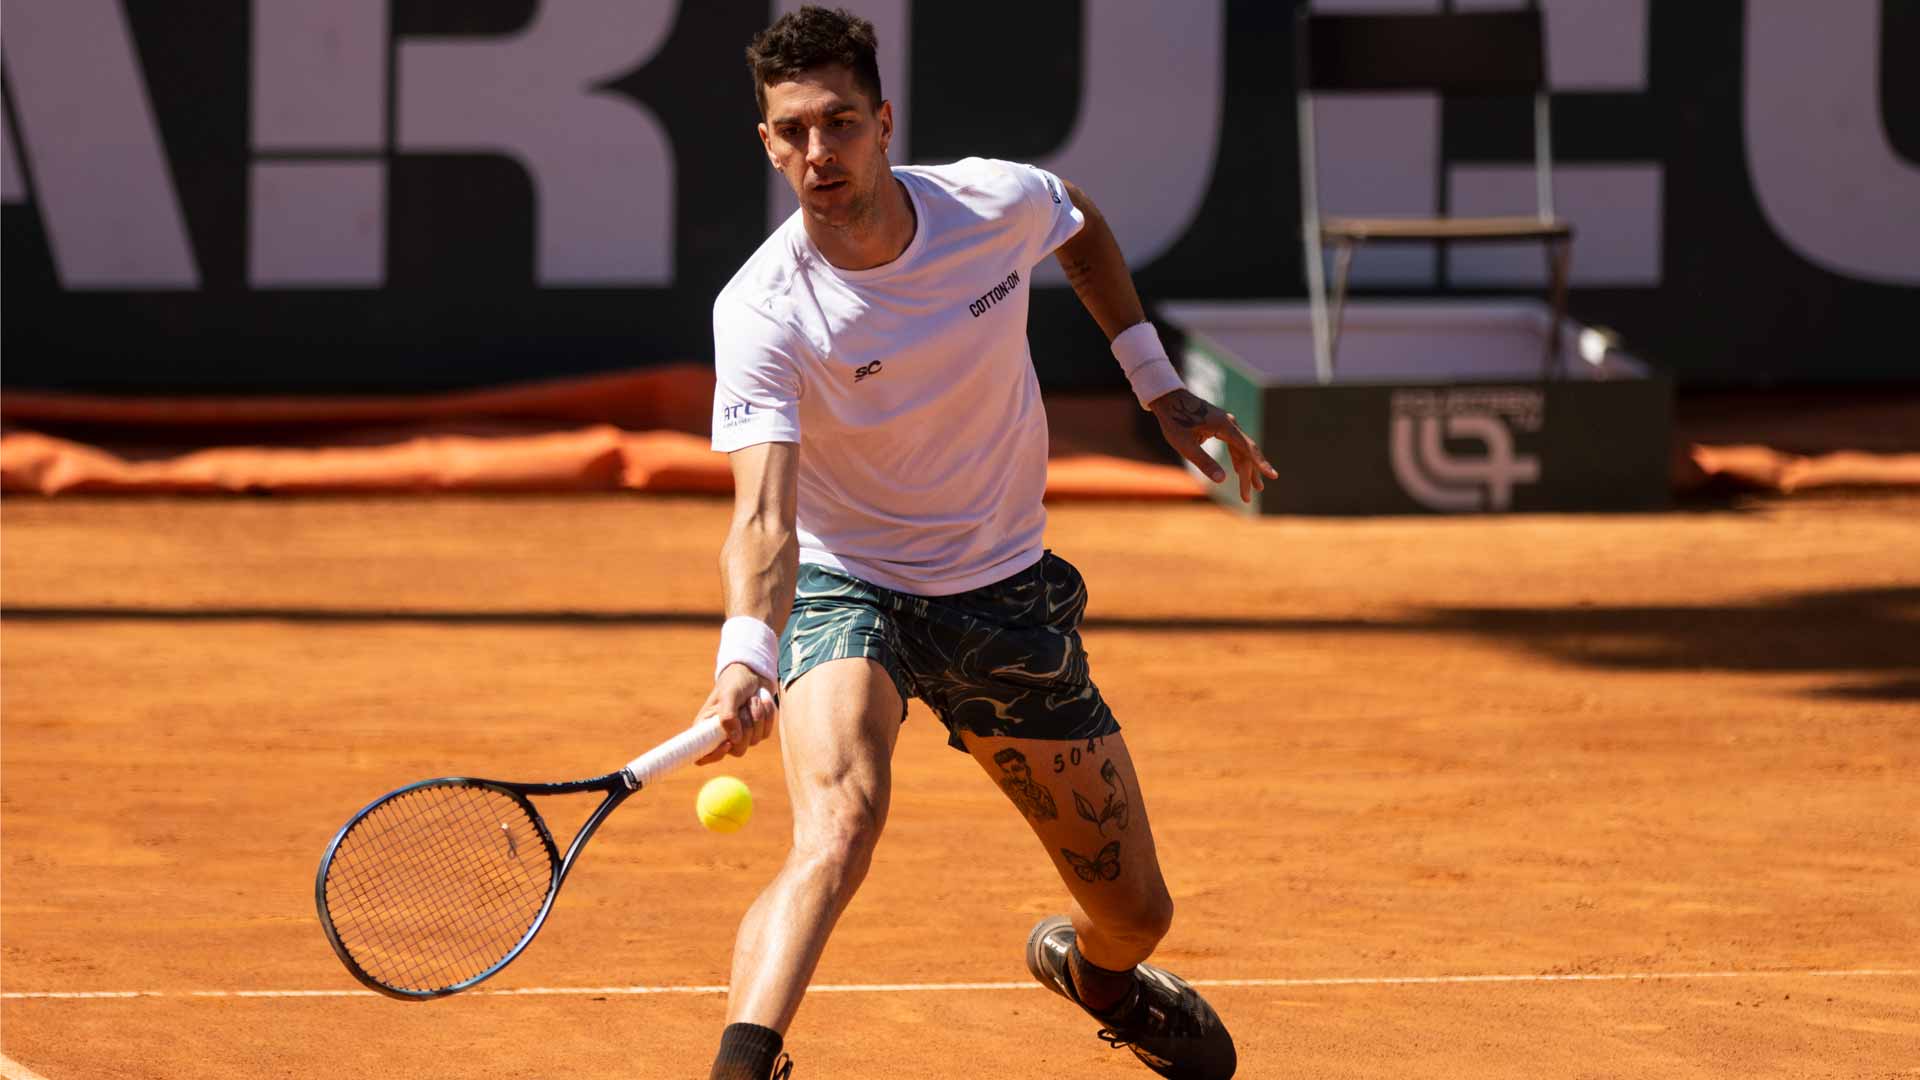 <a href='https://www.atptour.com/en/players/thanasi-kokkinakis/kd46/overview'>Thanasi Kokkinakis</a> in action at the ATP Challenger 175 event in Cagliari.